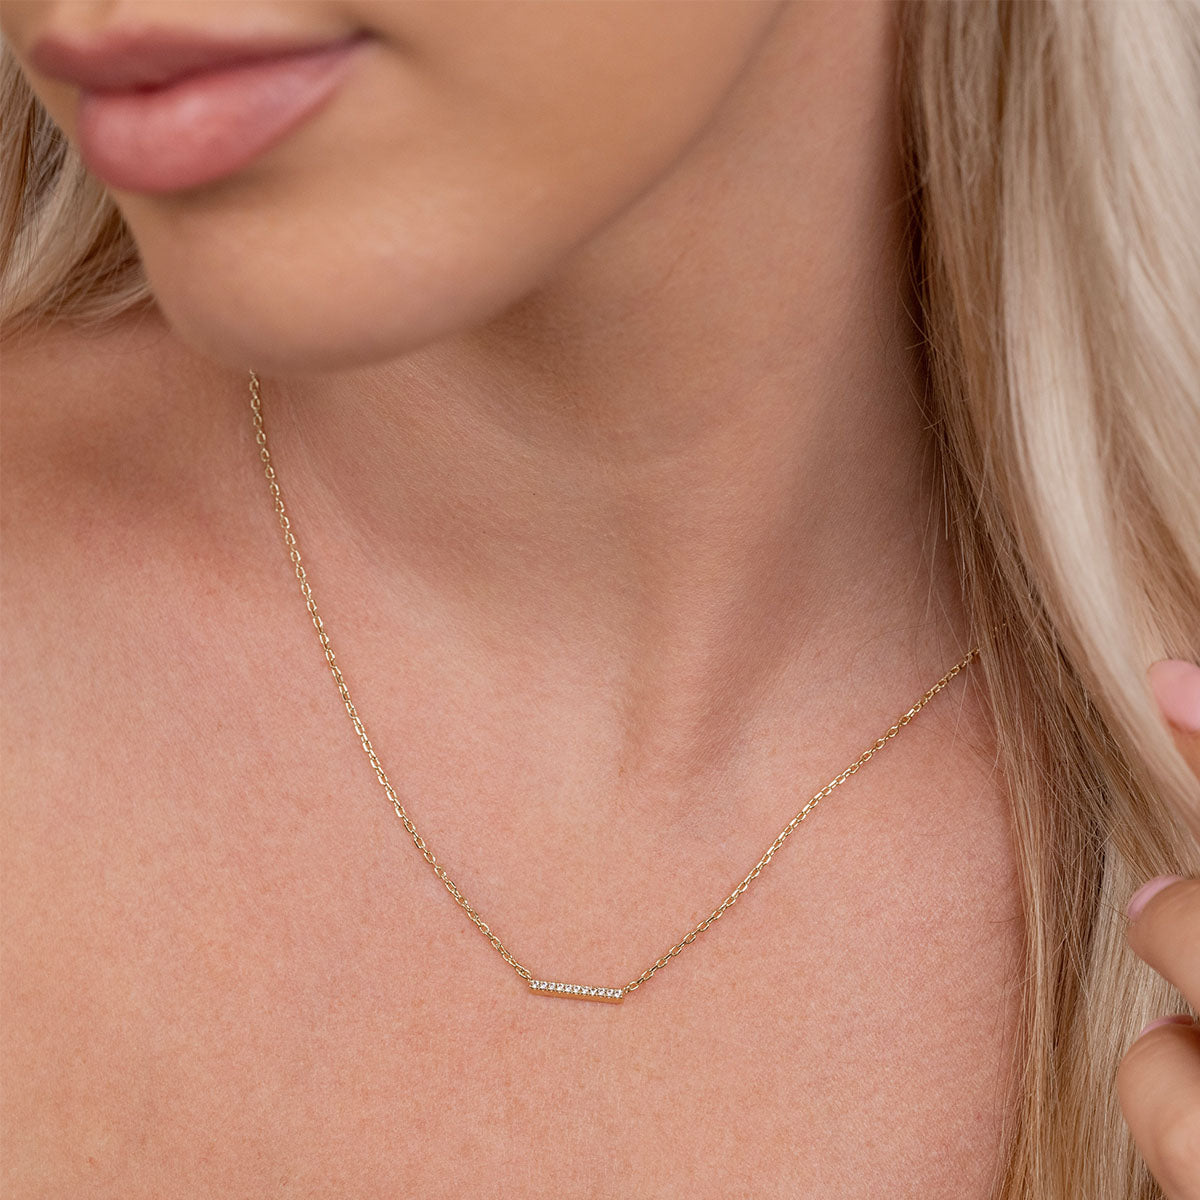 Dainty gold bar necklace on model